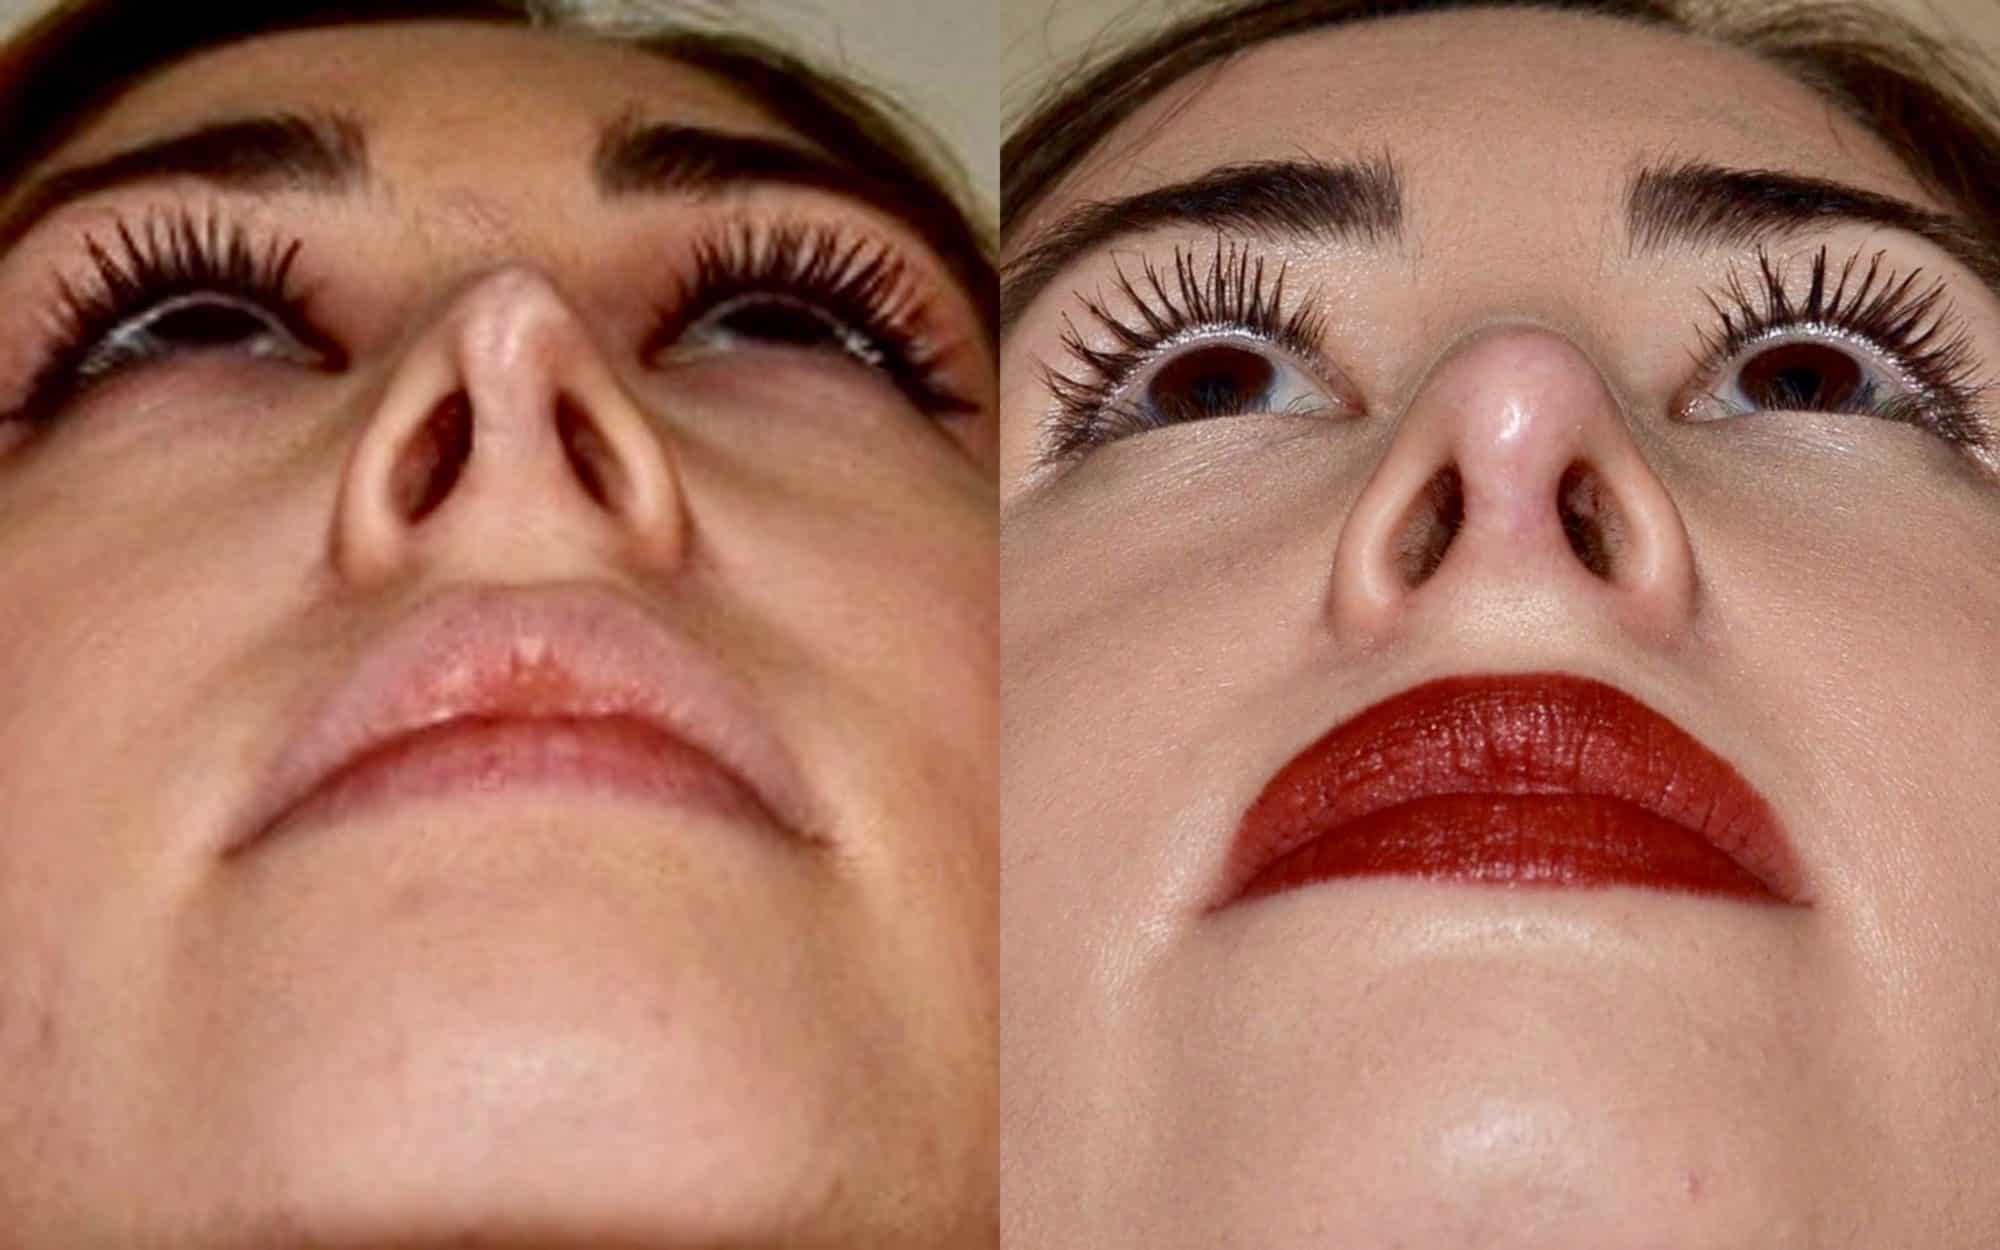 revision rhinoplasty before and after